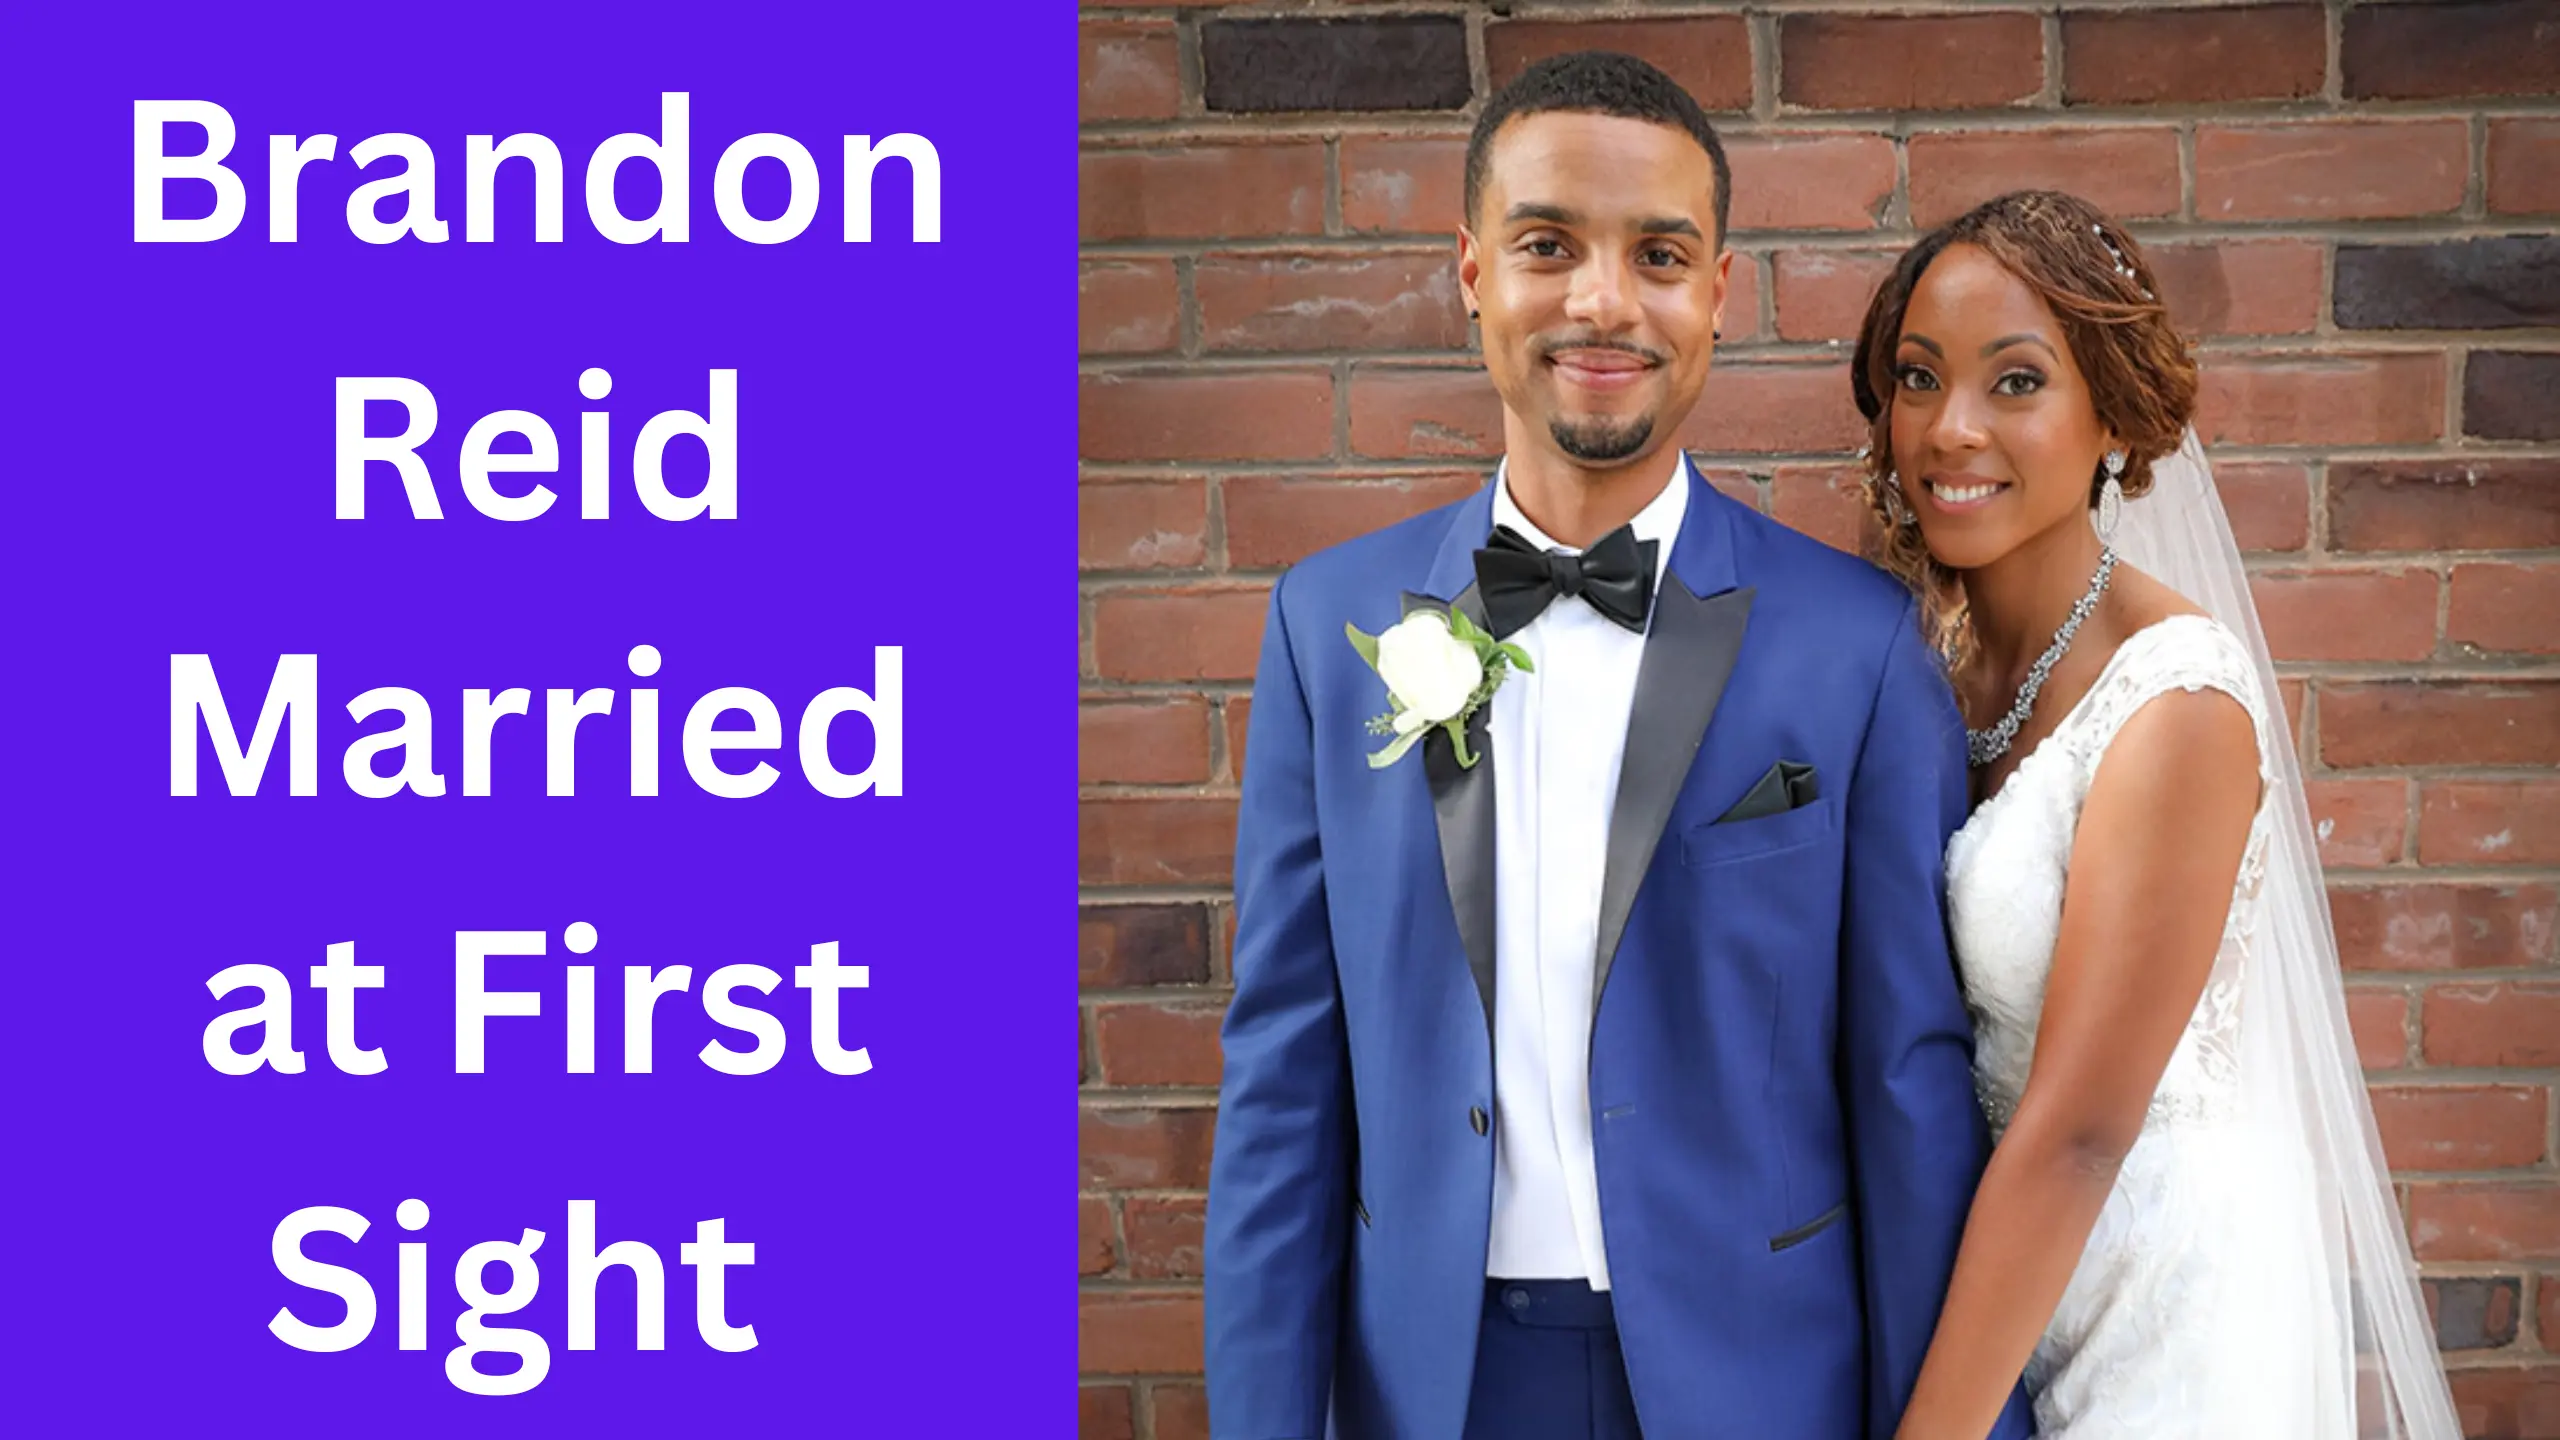 Brandon Reid Married at First Sight